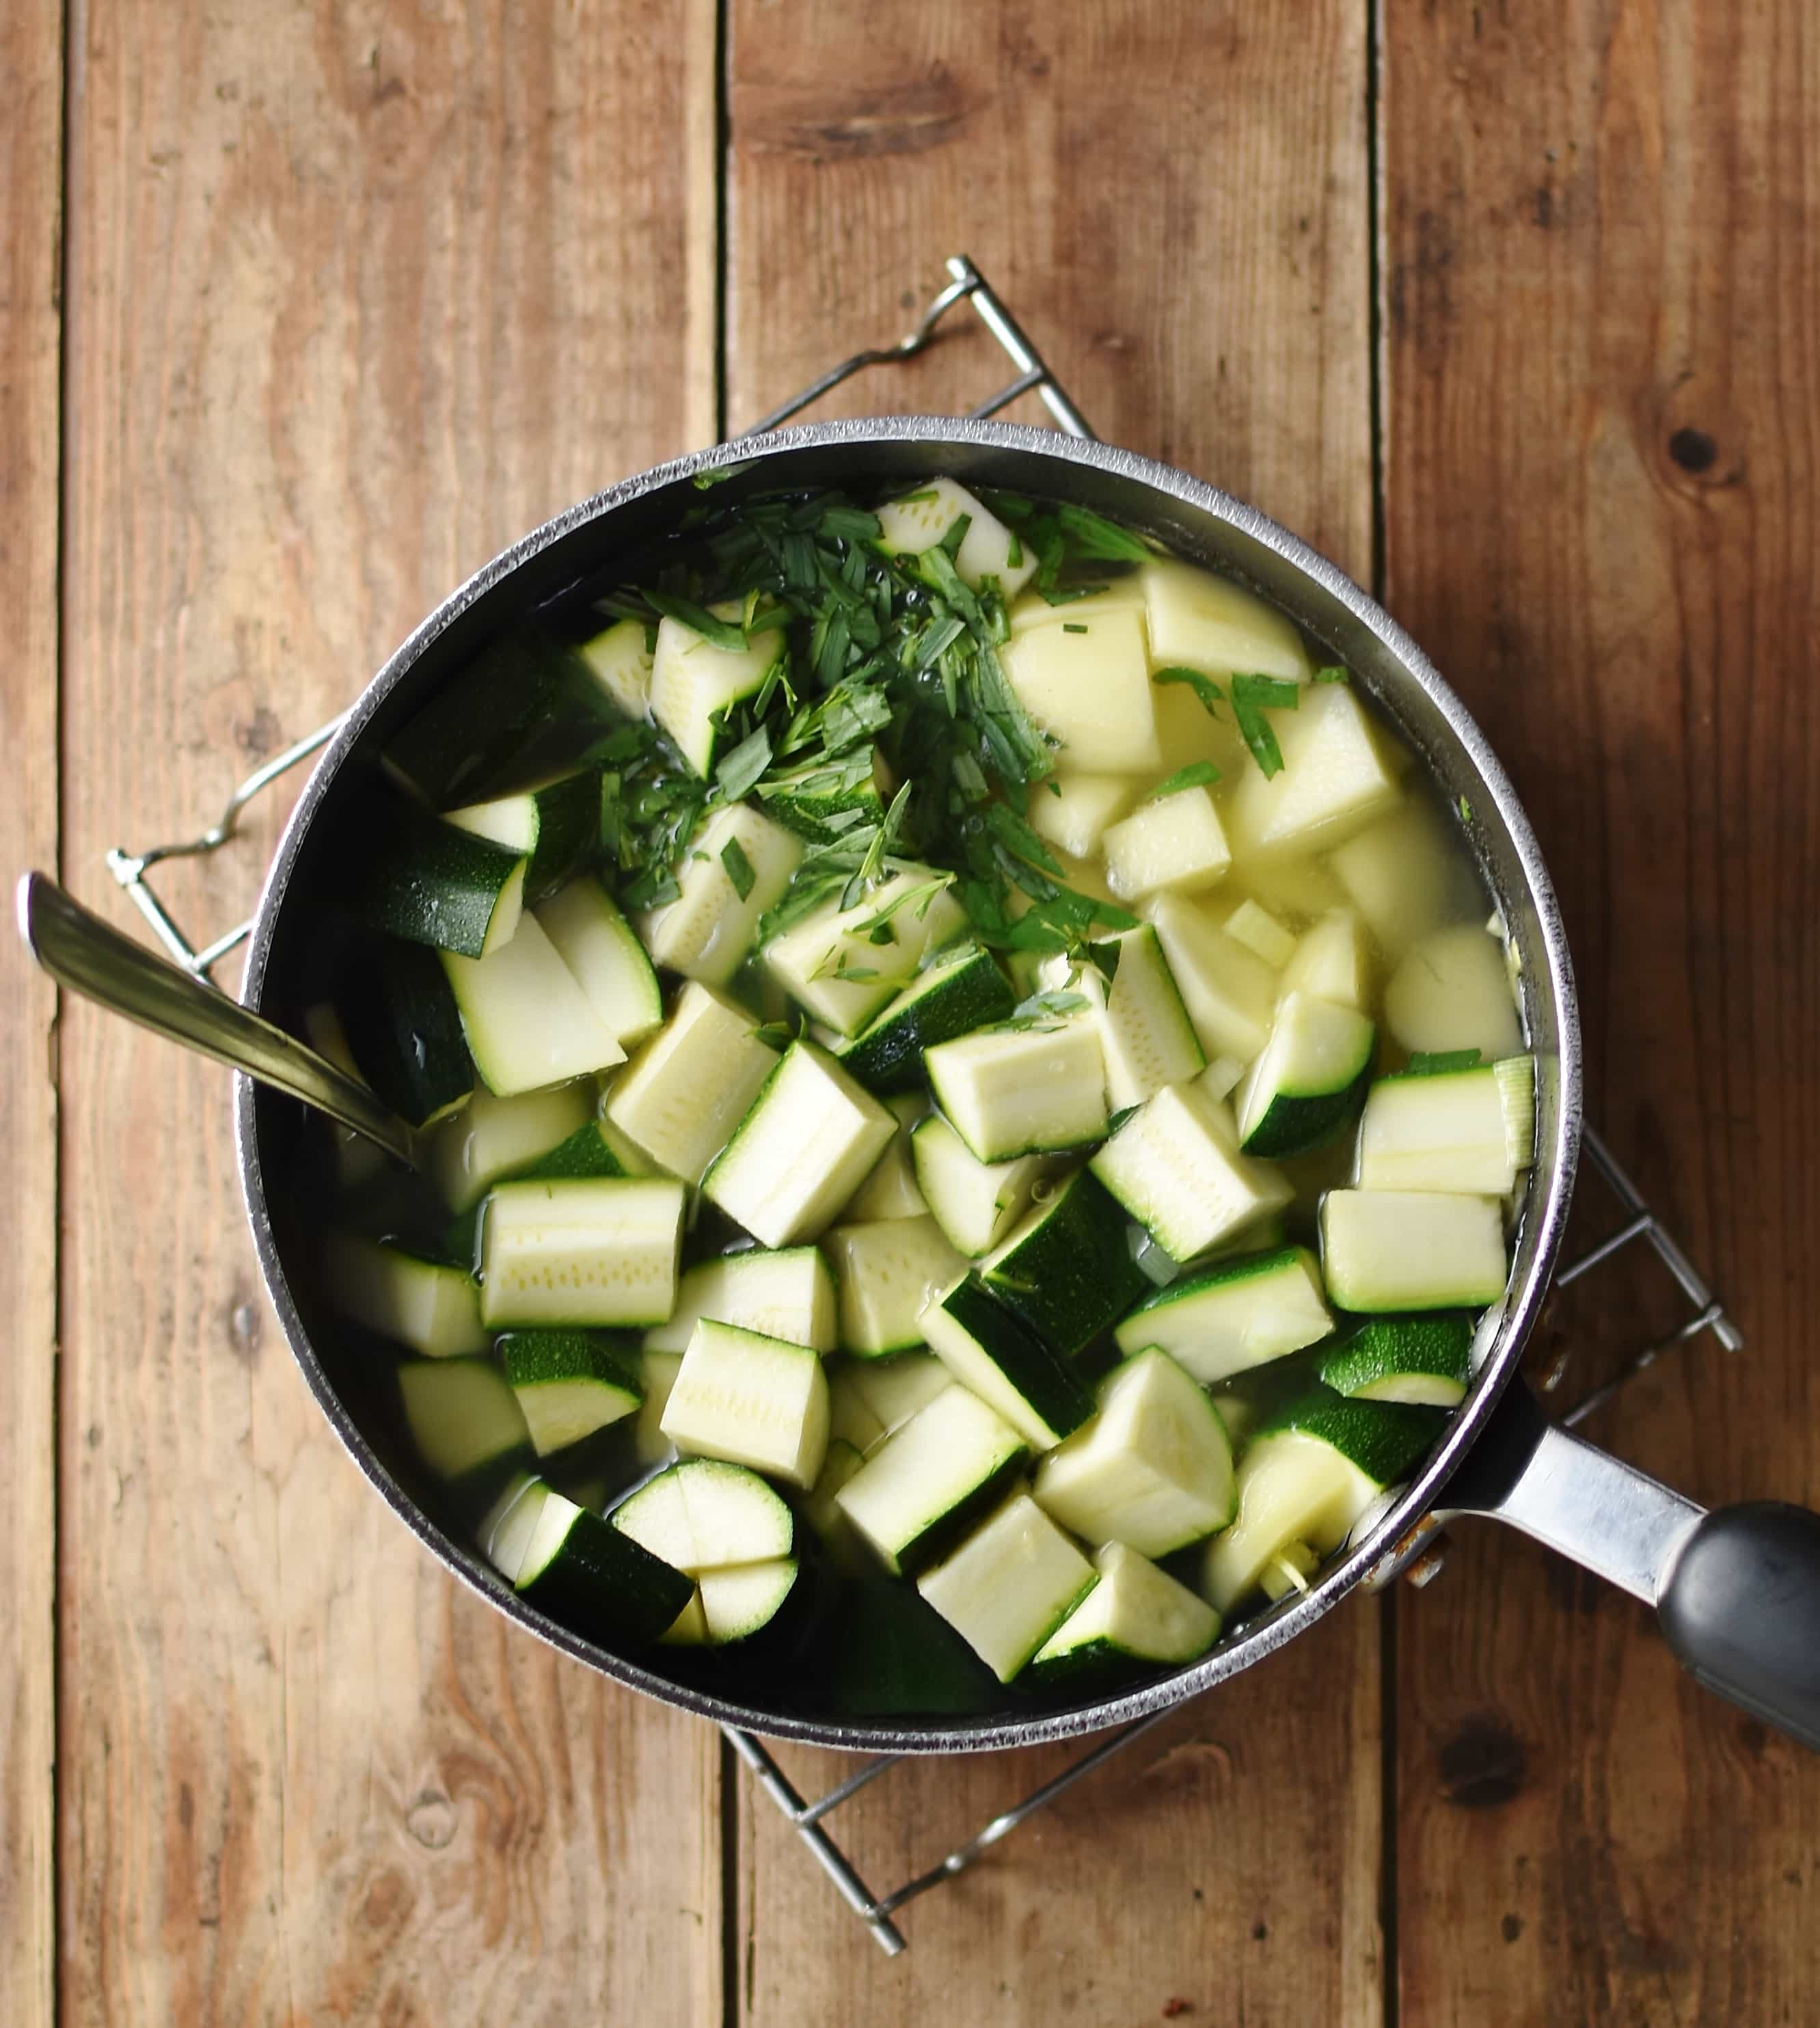 Cubed zucchini, potatoes and herbs in large pot filled with water.